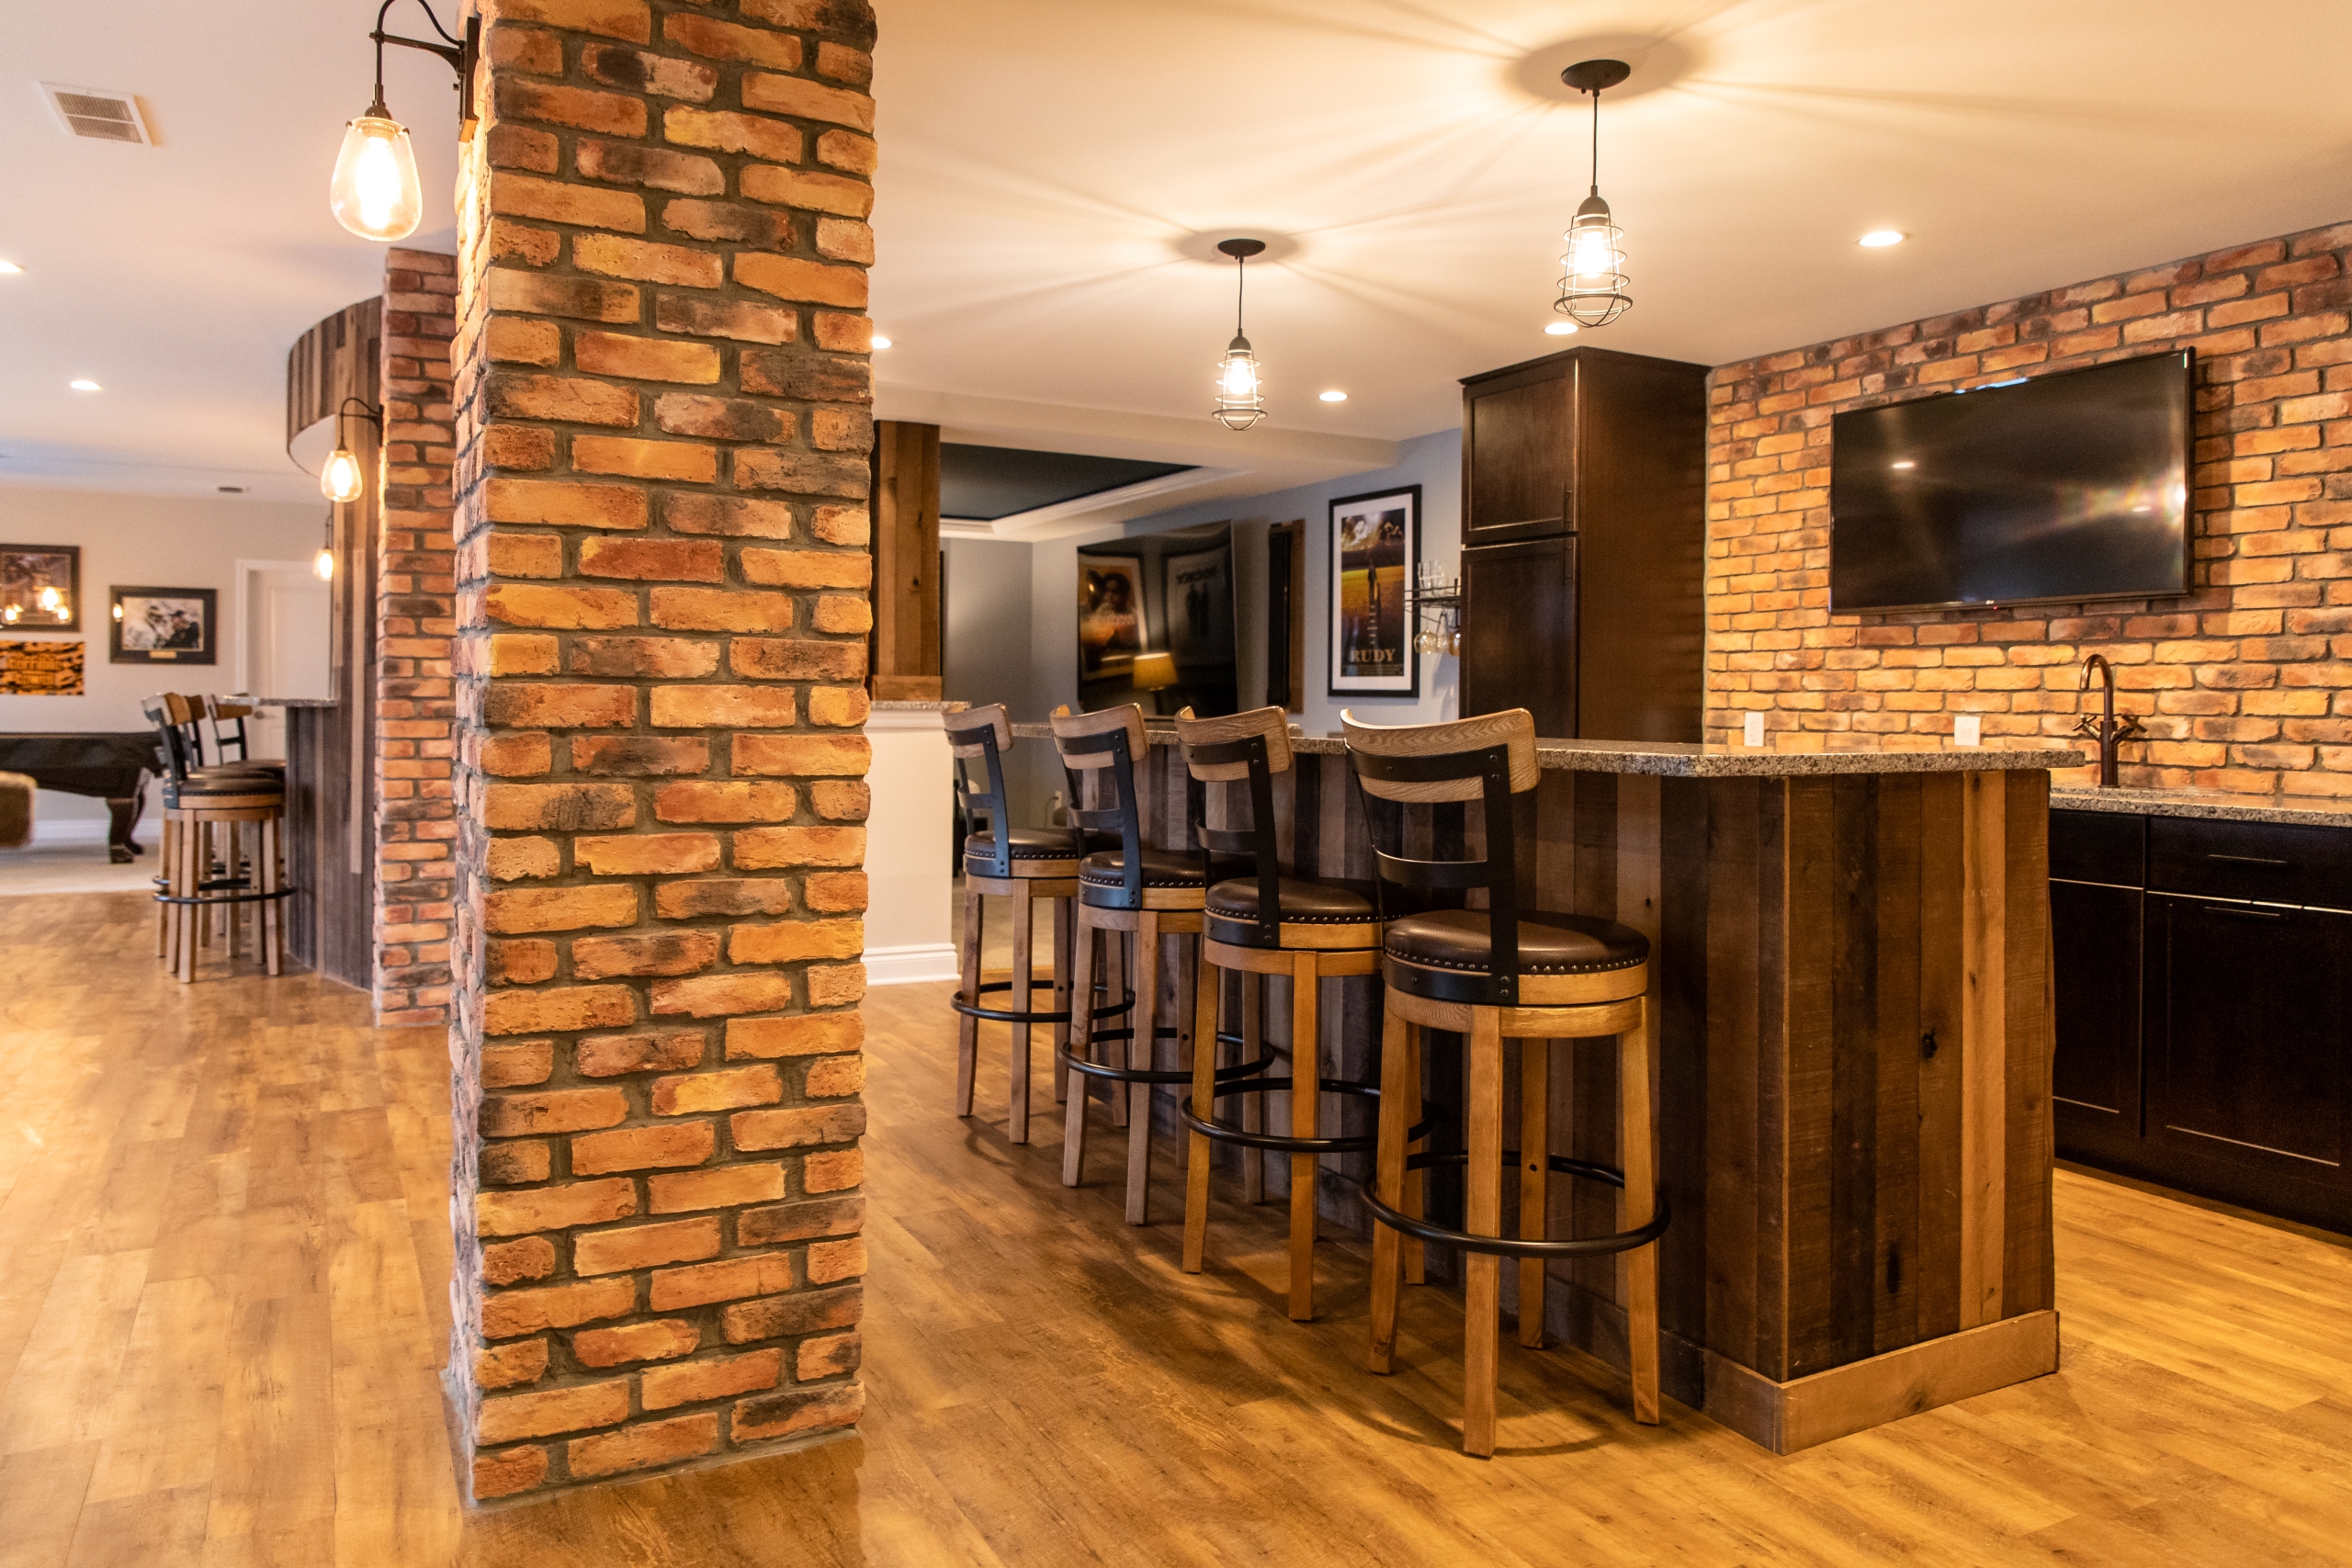 Woodline Building Company Project:Pub Inspired Basement Entertaining Space